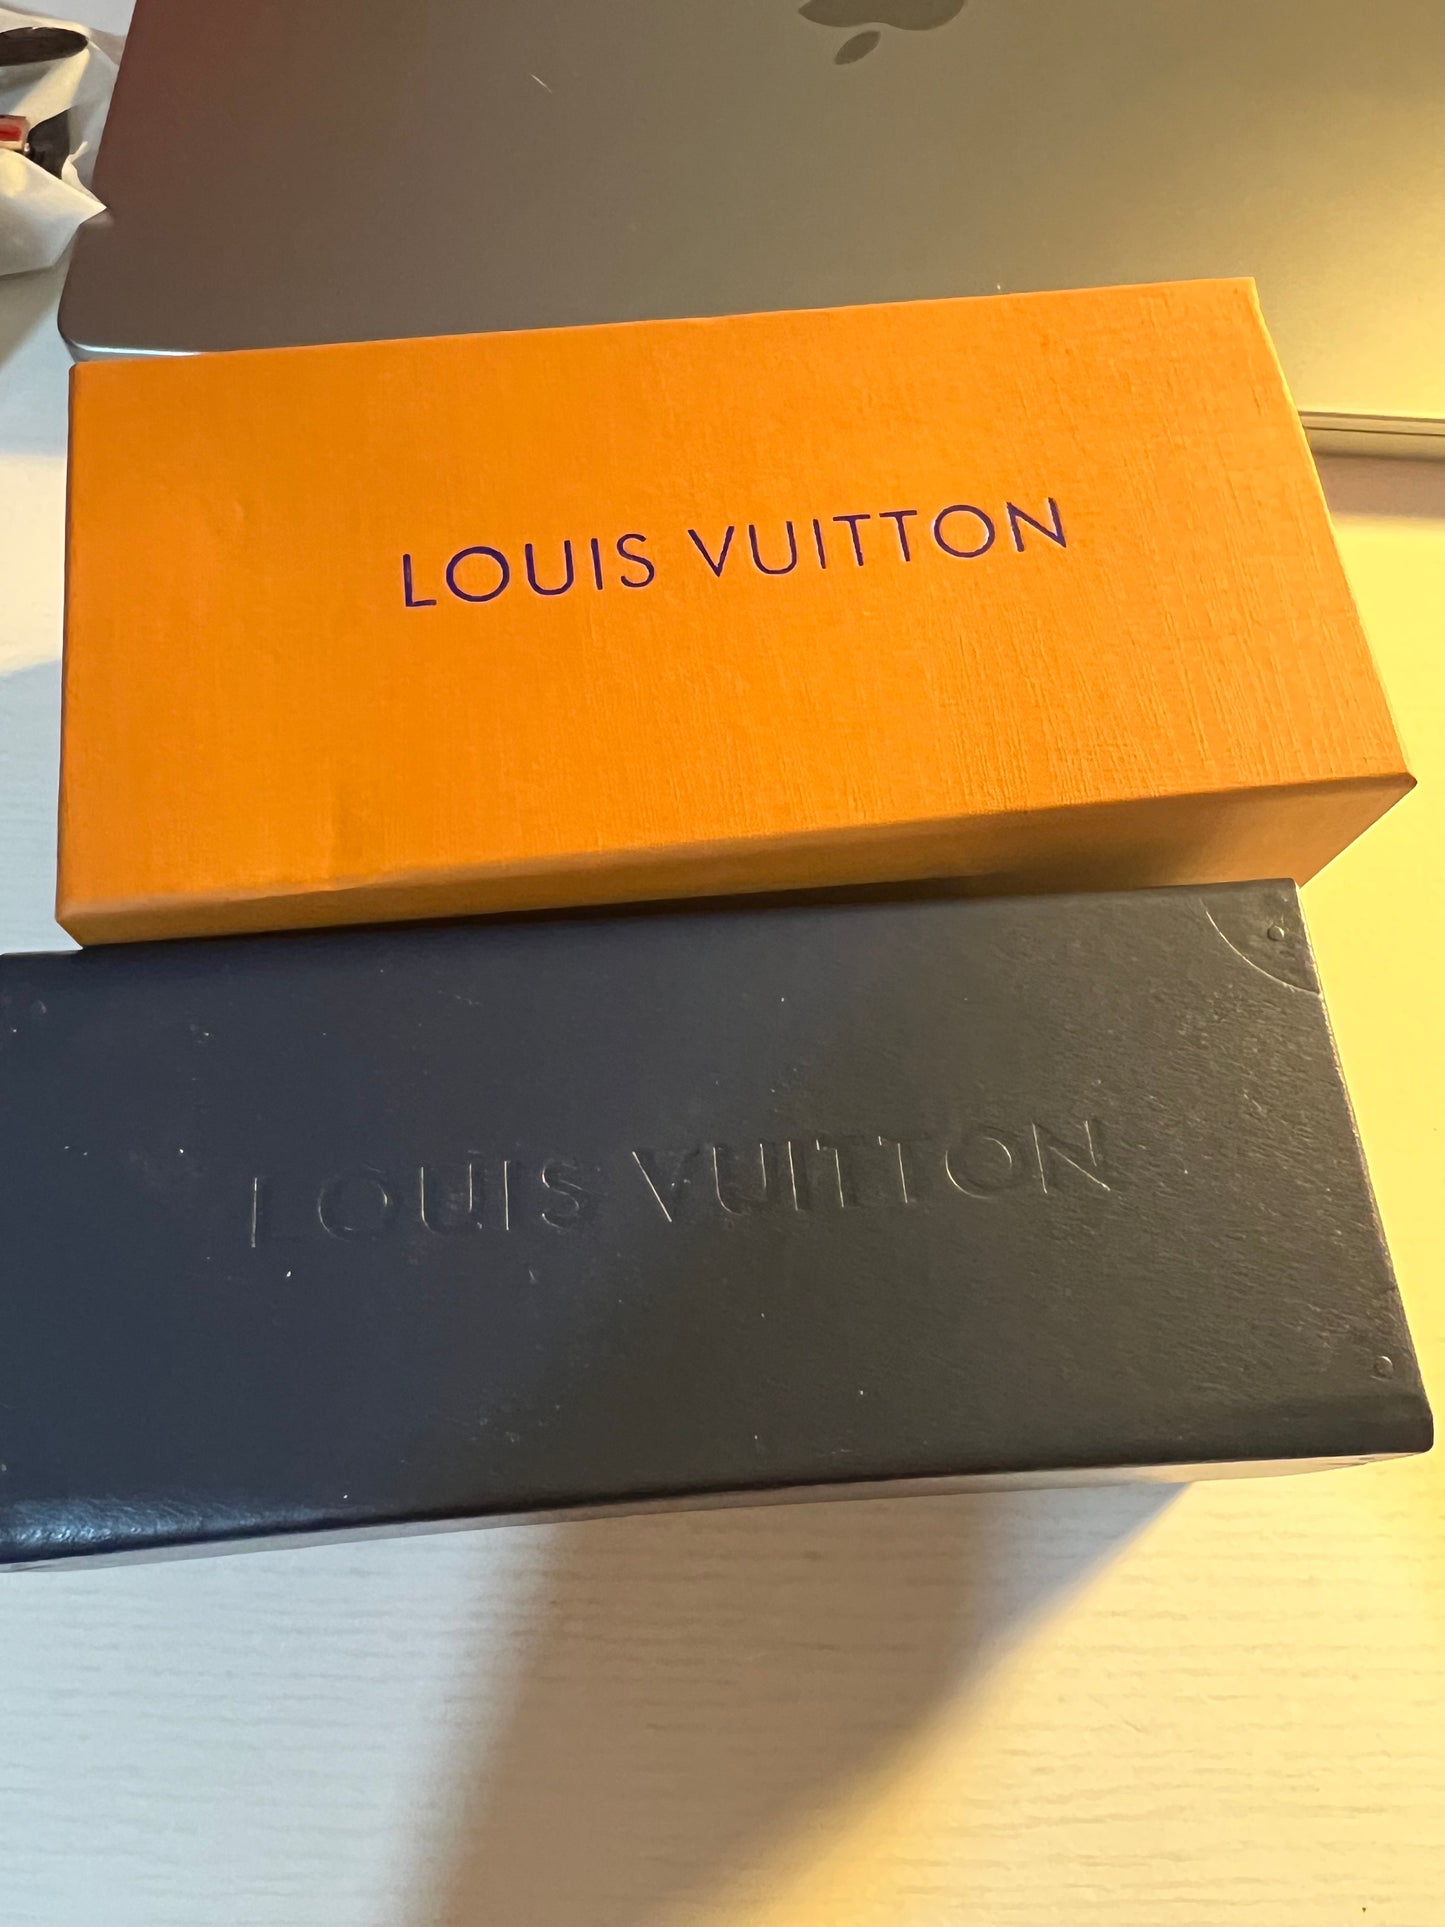 LV Gold Plated Sunnies